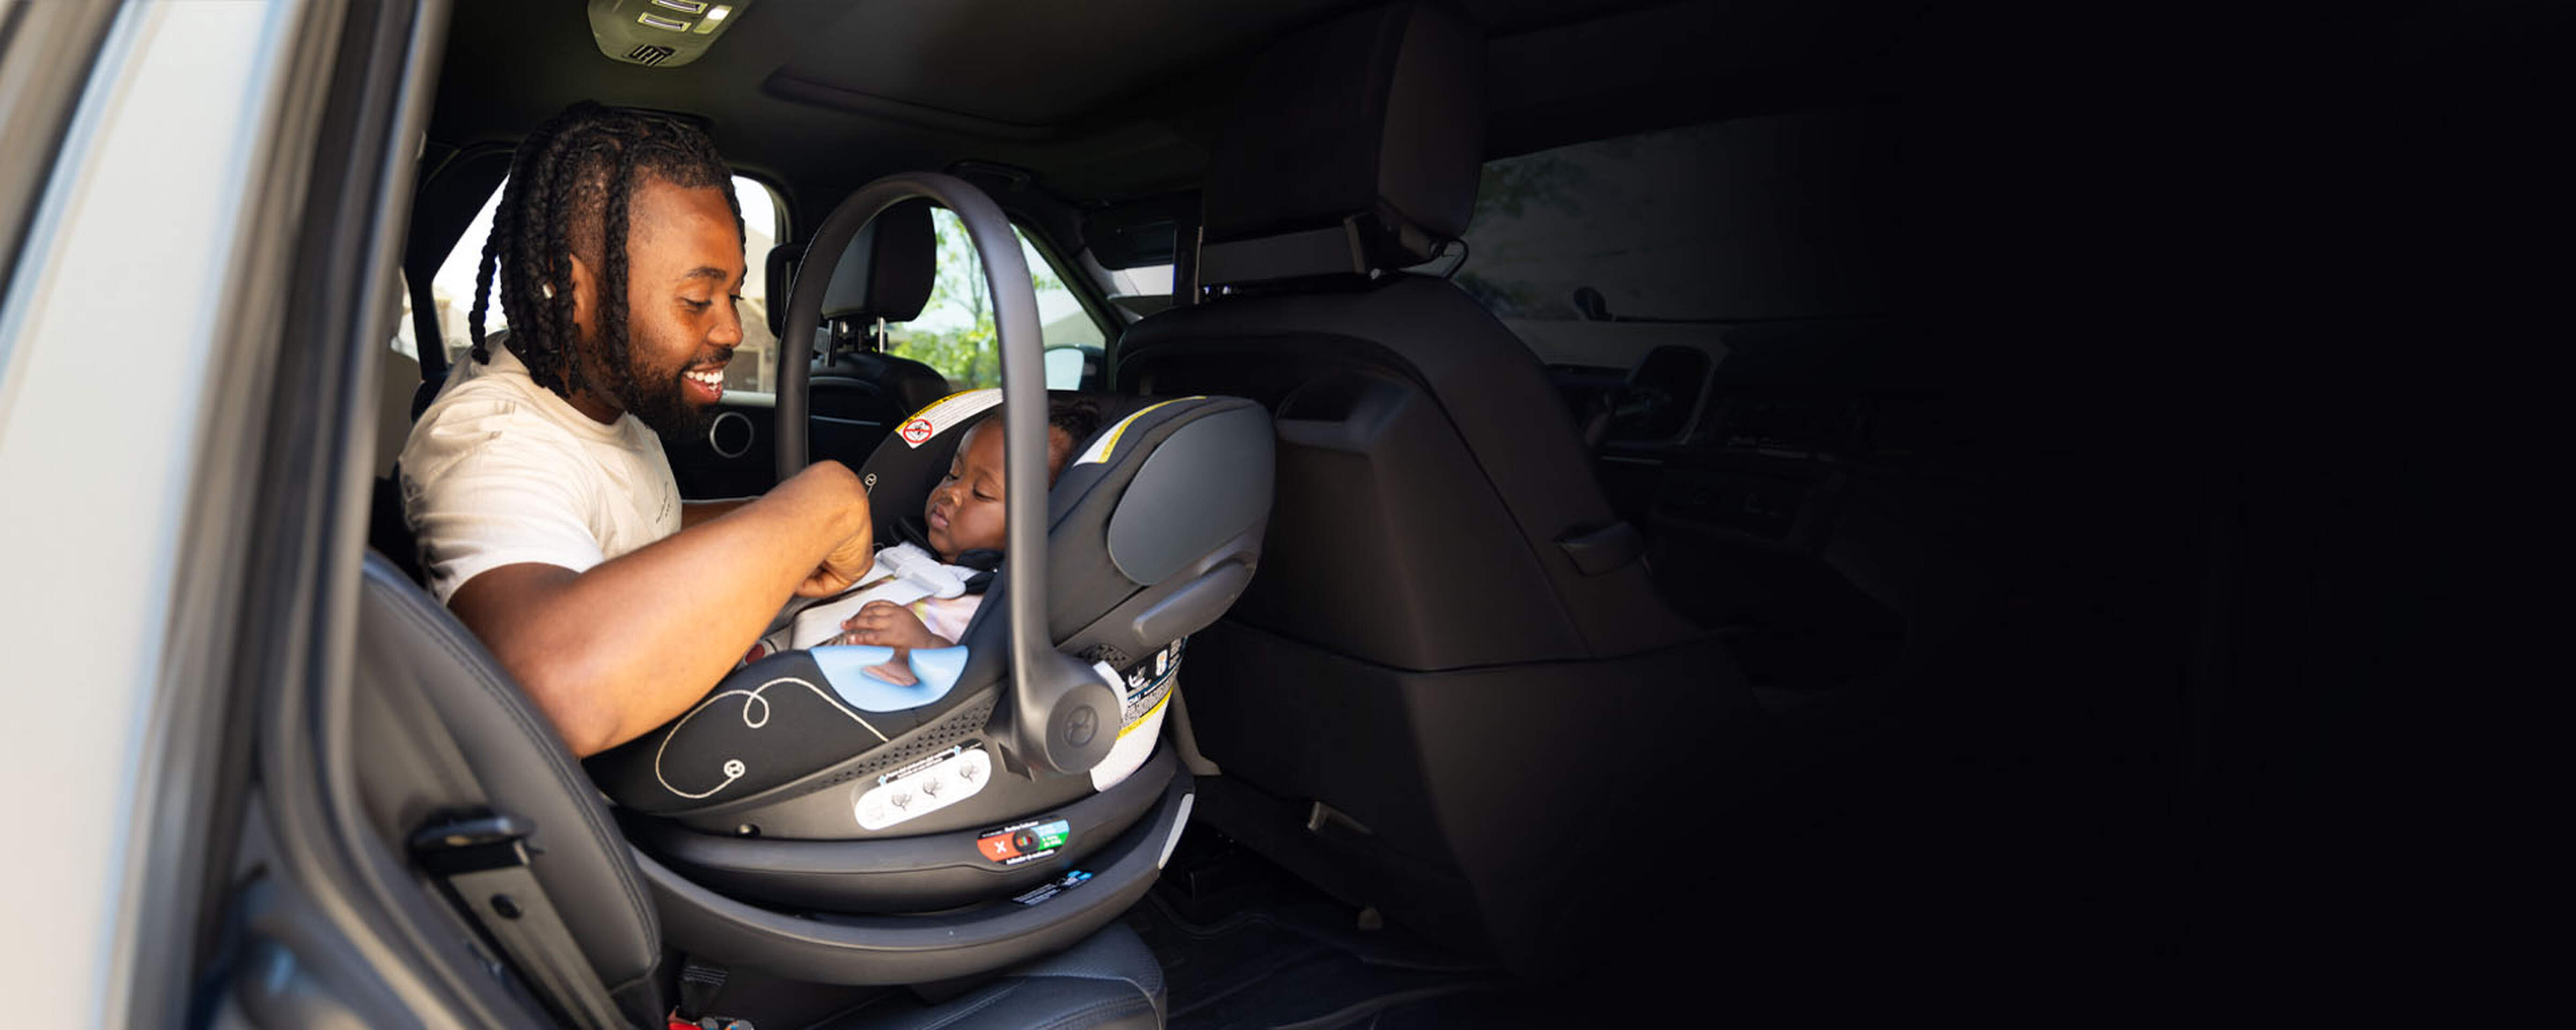 CYBEX Car Seat Installation and Usage